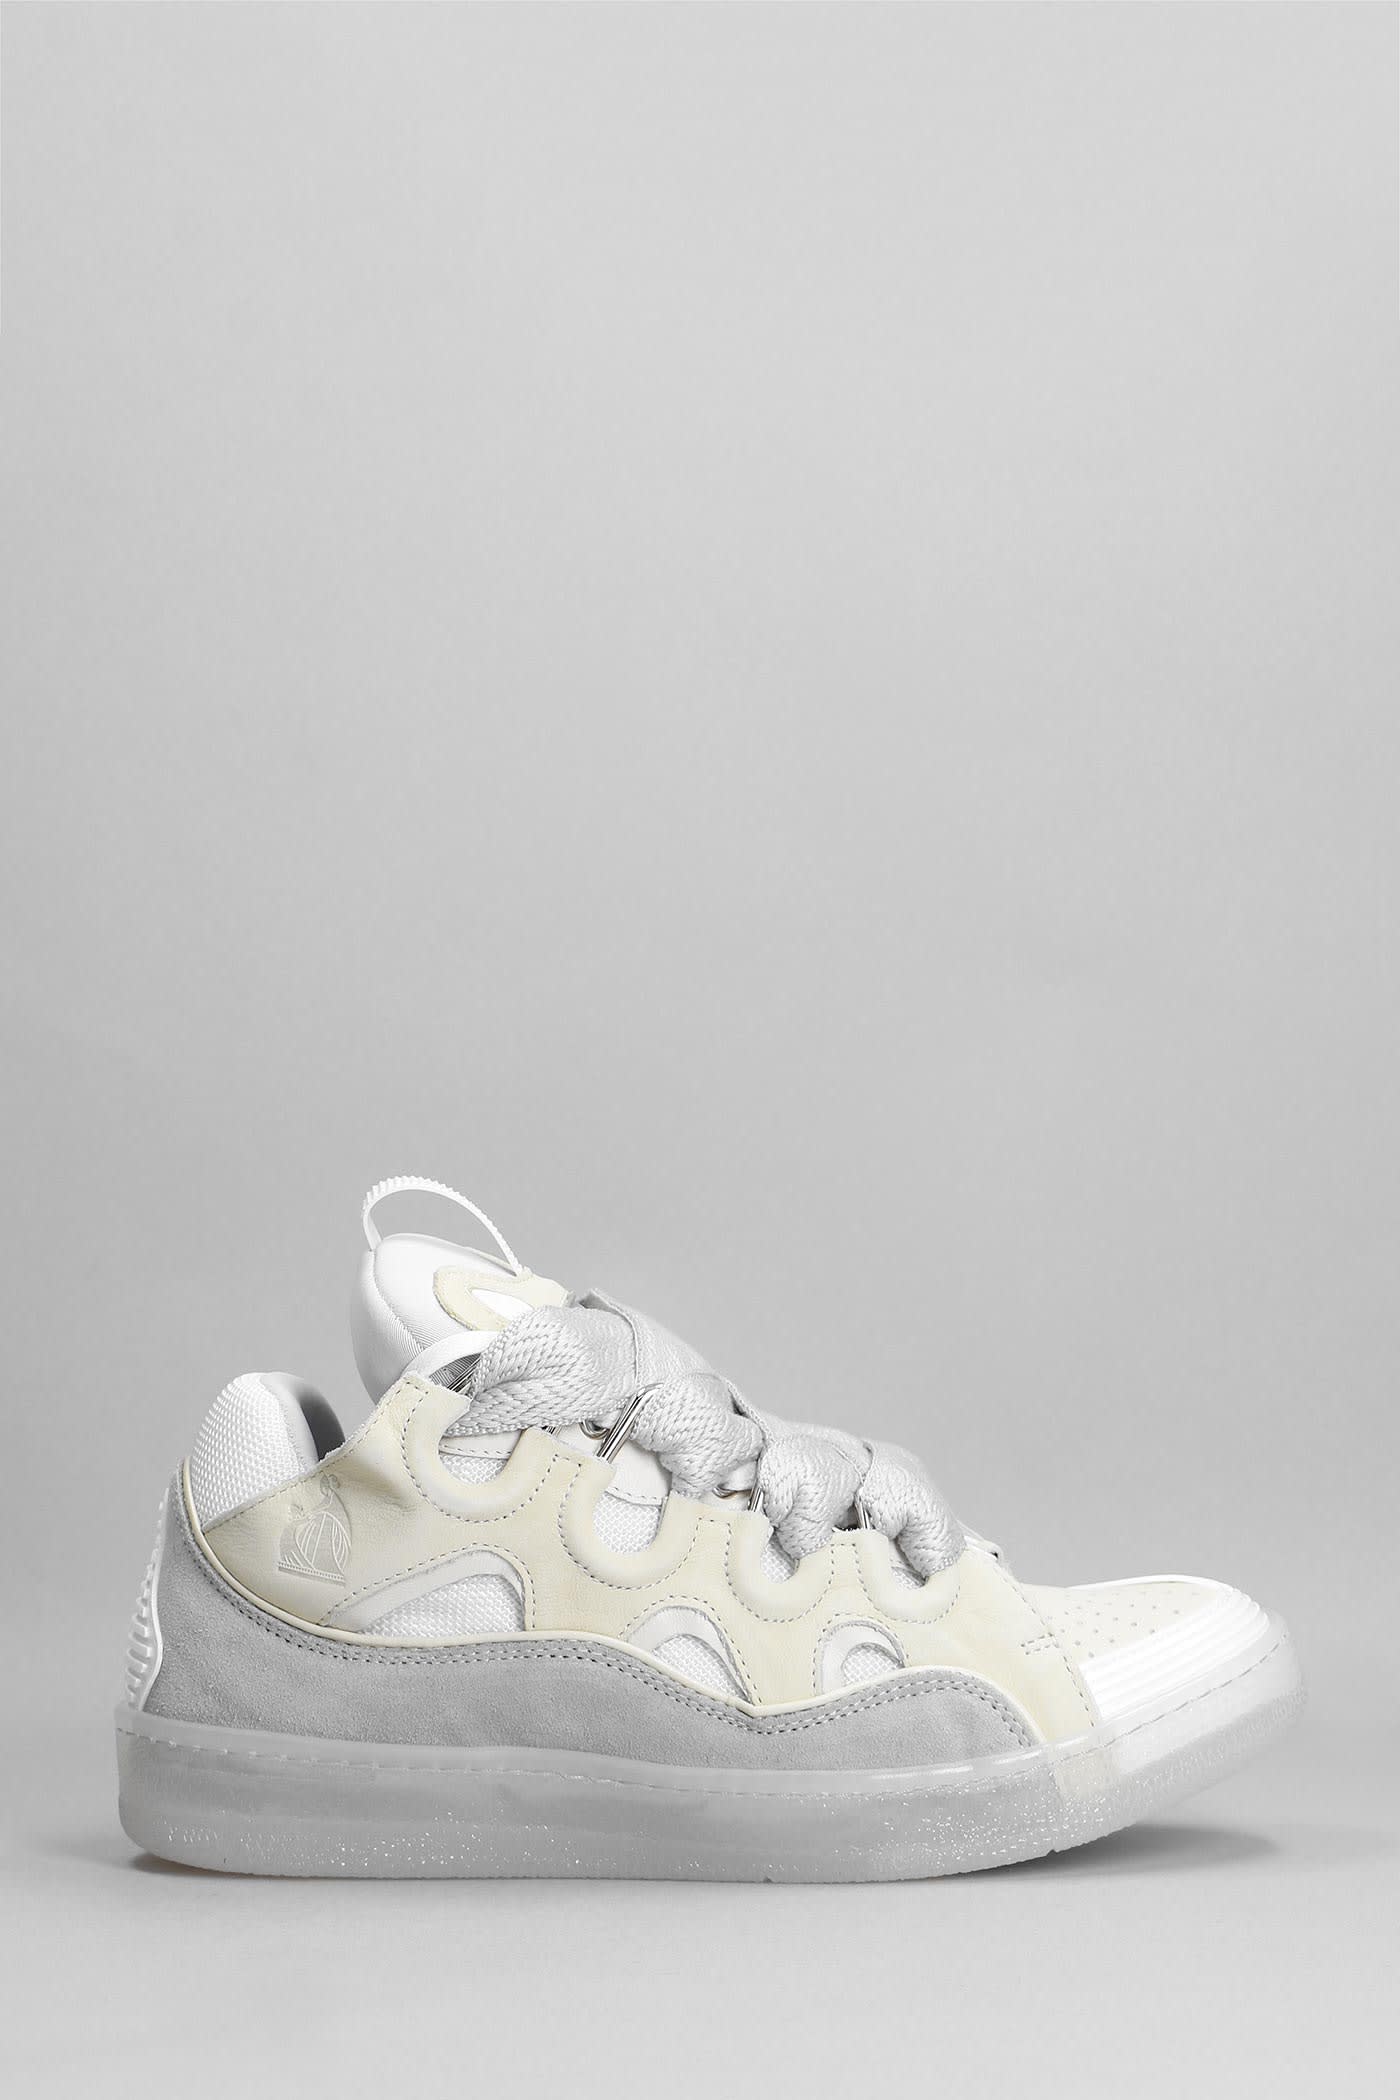 LANVIN CURB SNEAKERS IN WHITE SUEDE AND LEATHER